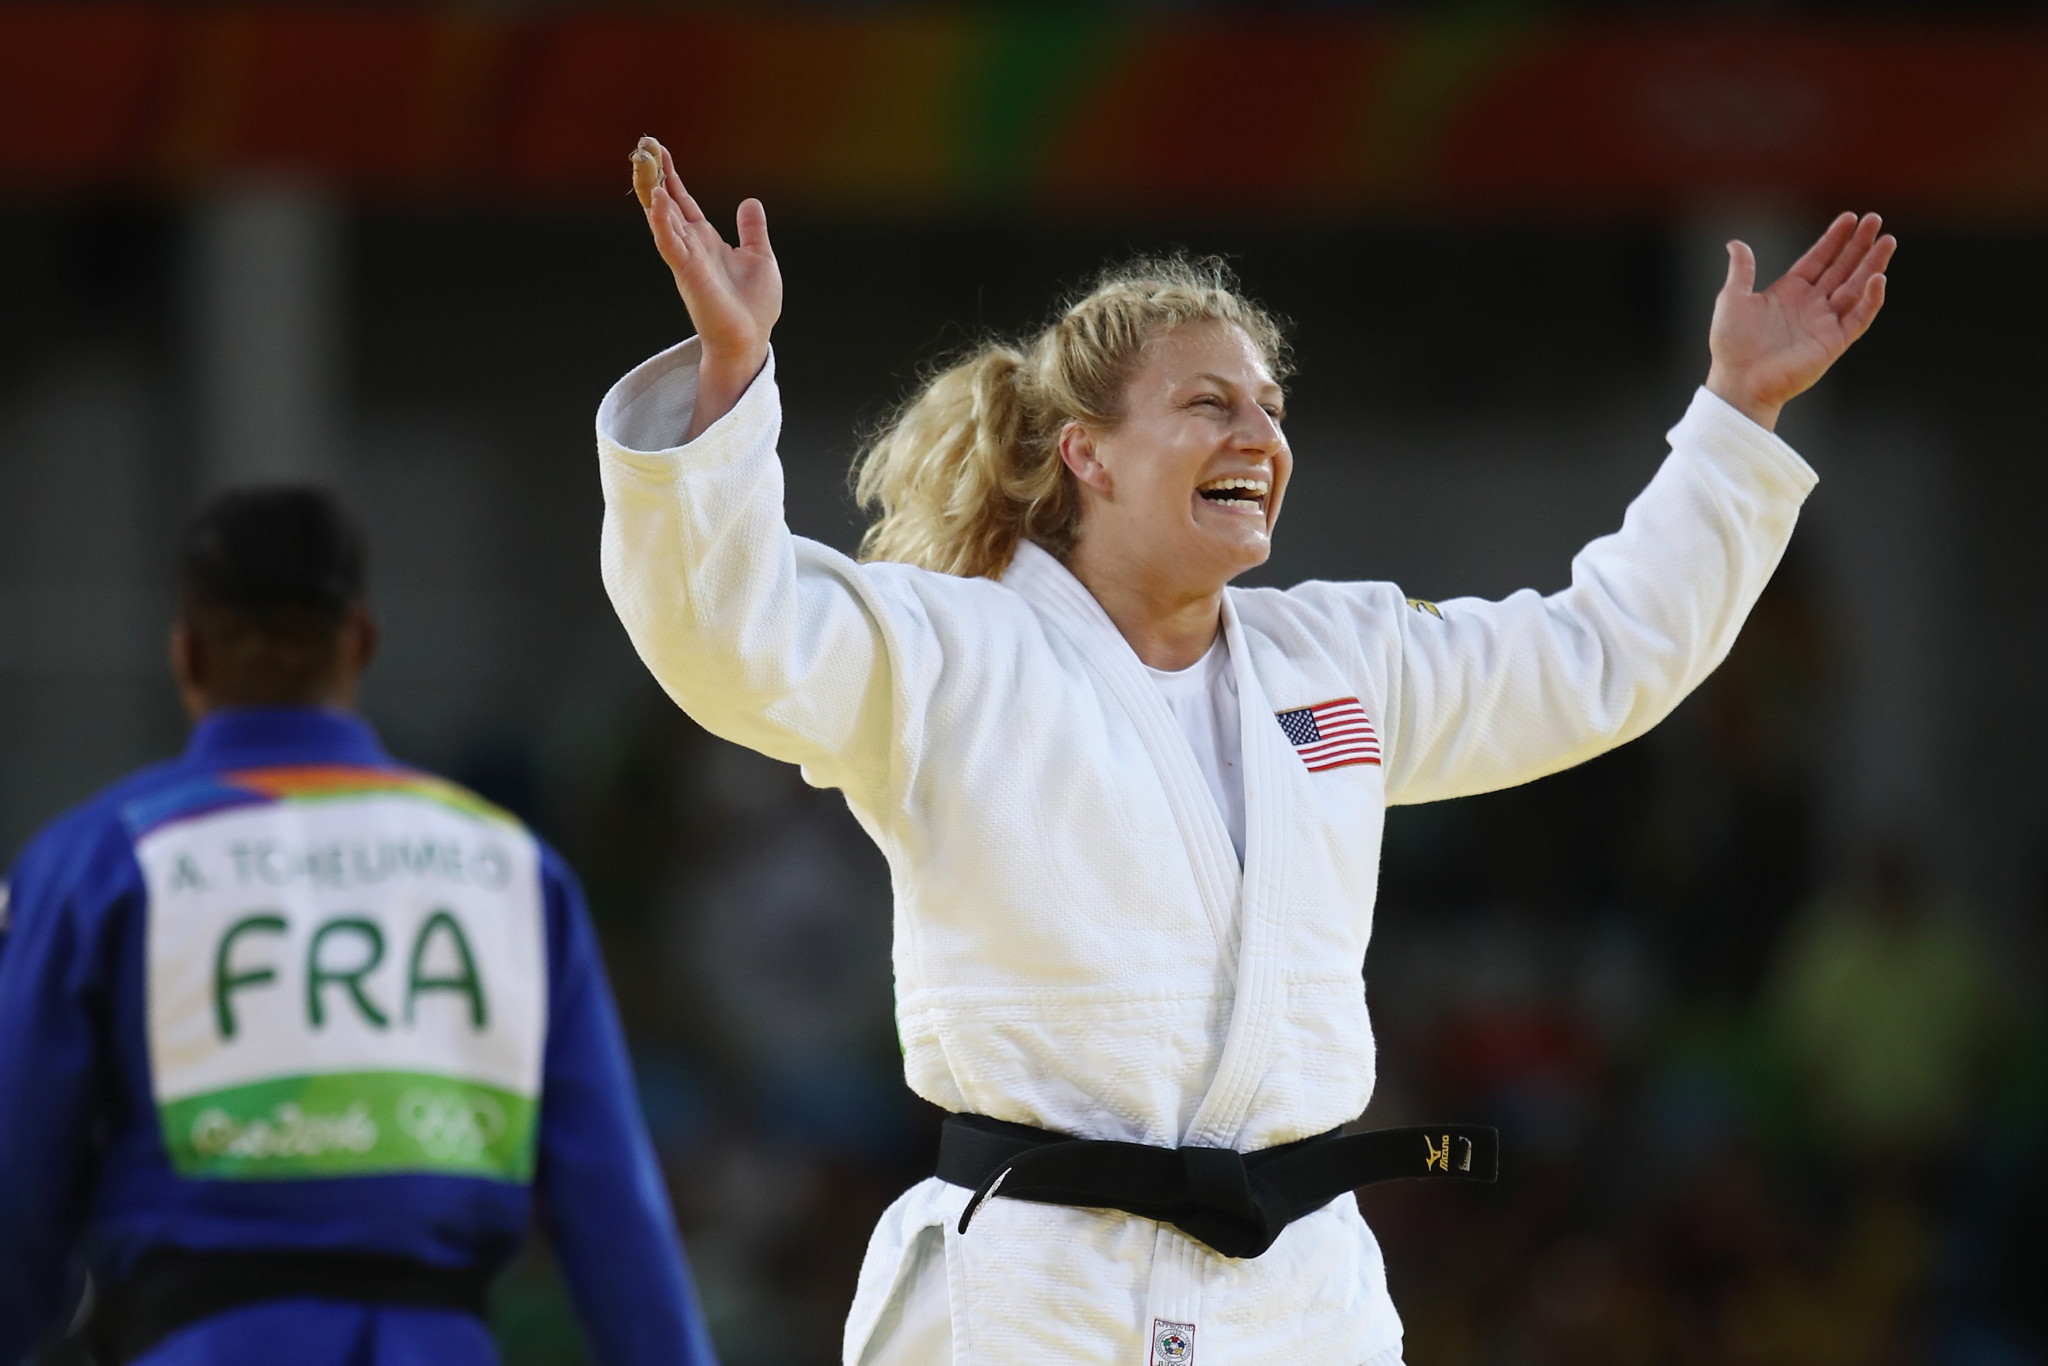 Double gold medallist Kayla Harrison is the most successful American judoka ©Getty Images